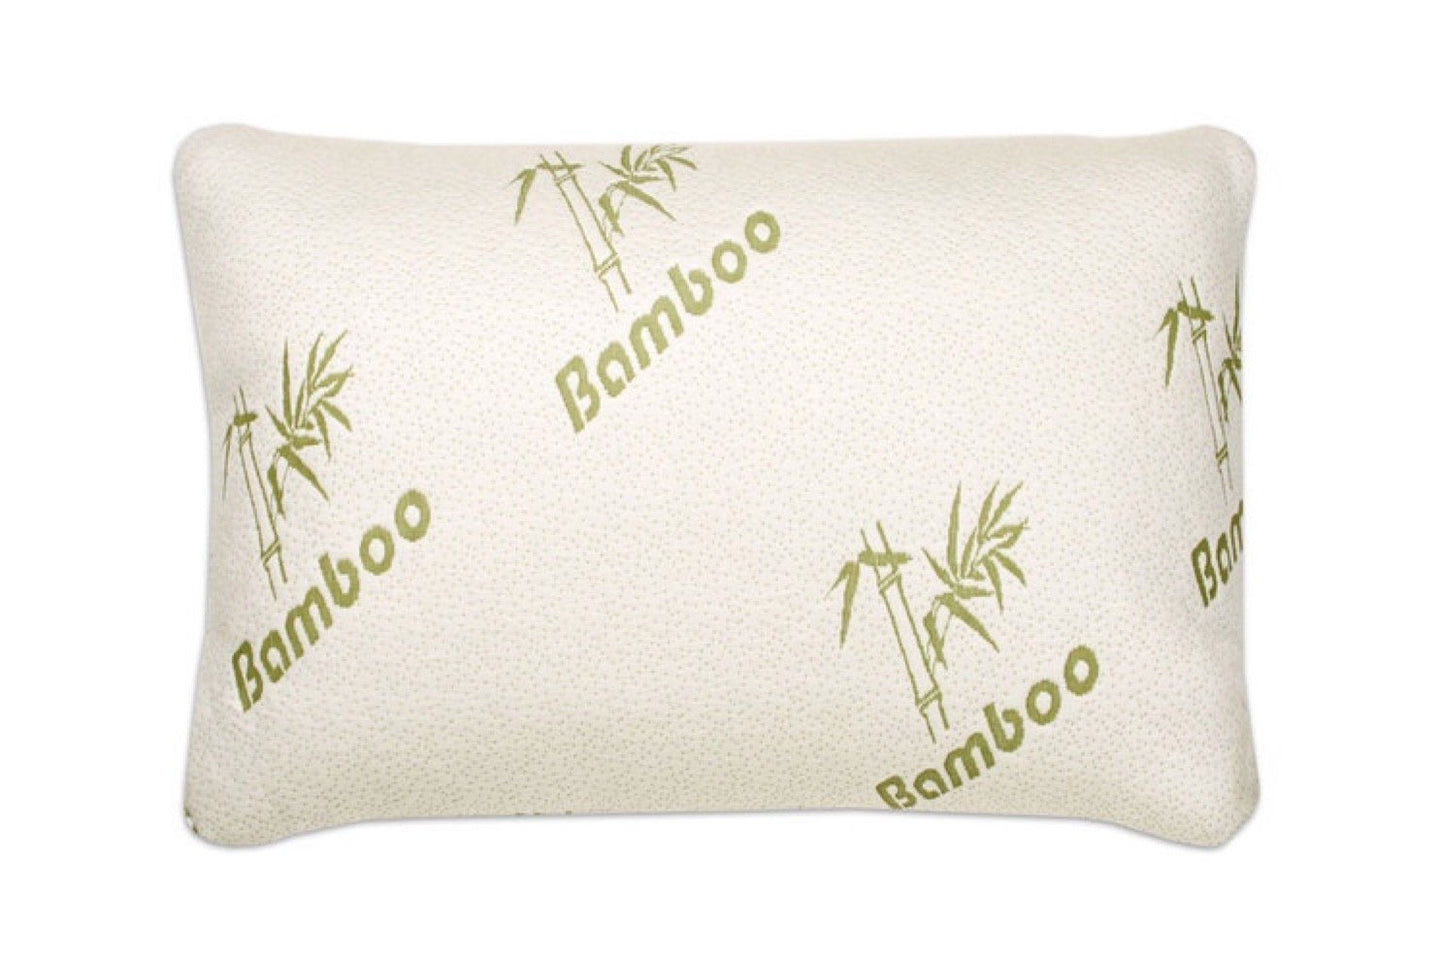 Stay Cool Bamboo Memory Foam Pillow